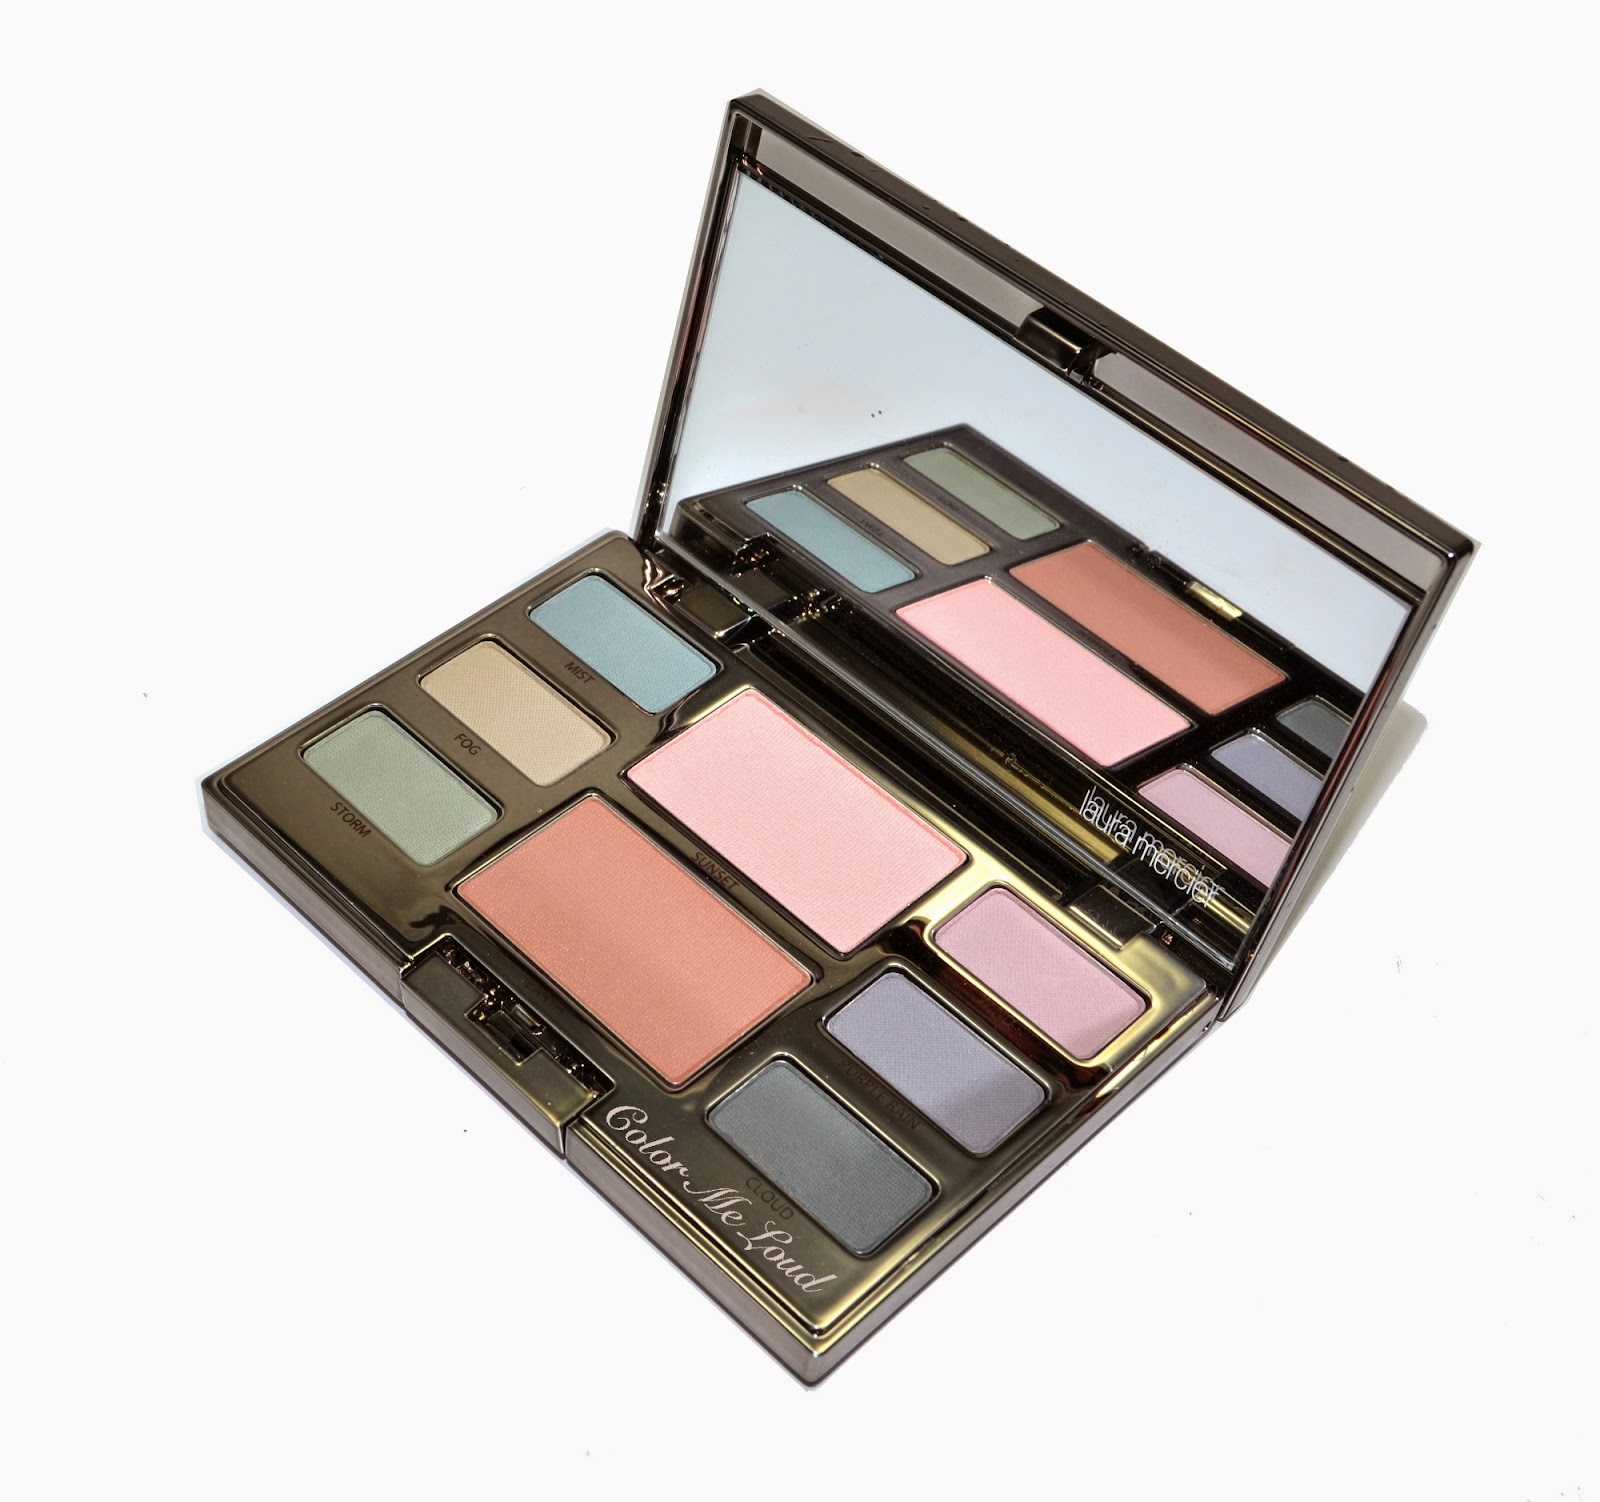 Rainy Eyes with Laura Mercier's Watercolour Mist Eye & Cheek Palette for Spring 2015, Review, Swatch & FOTD